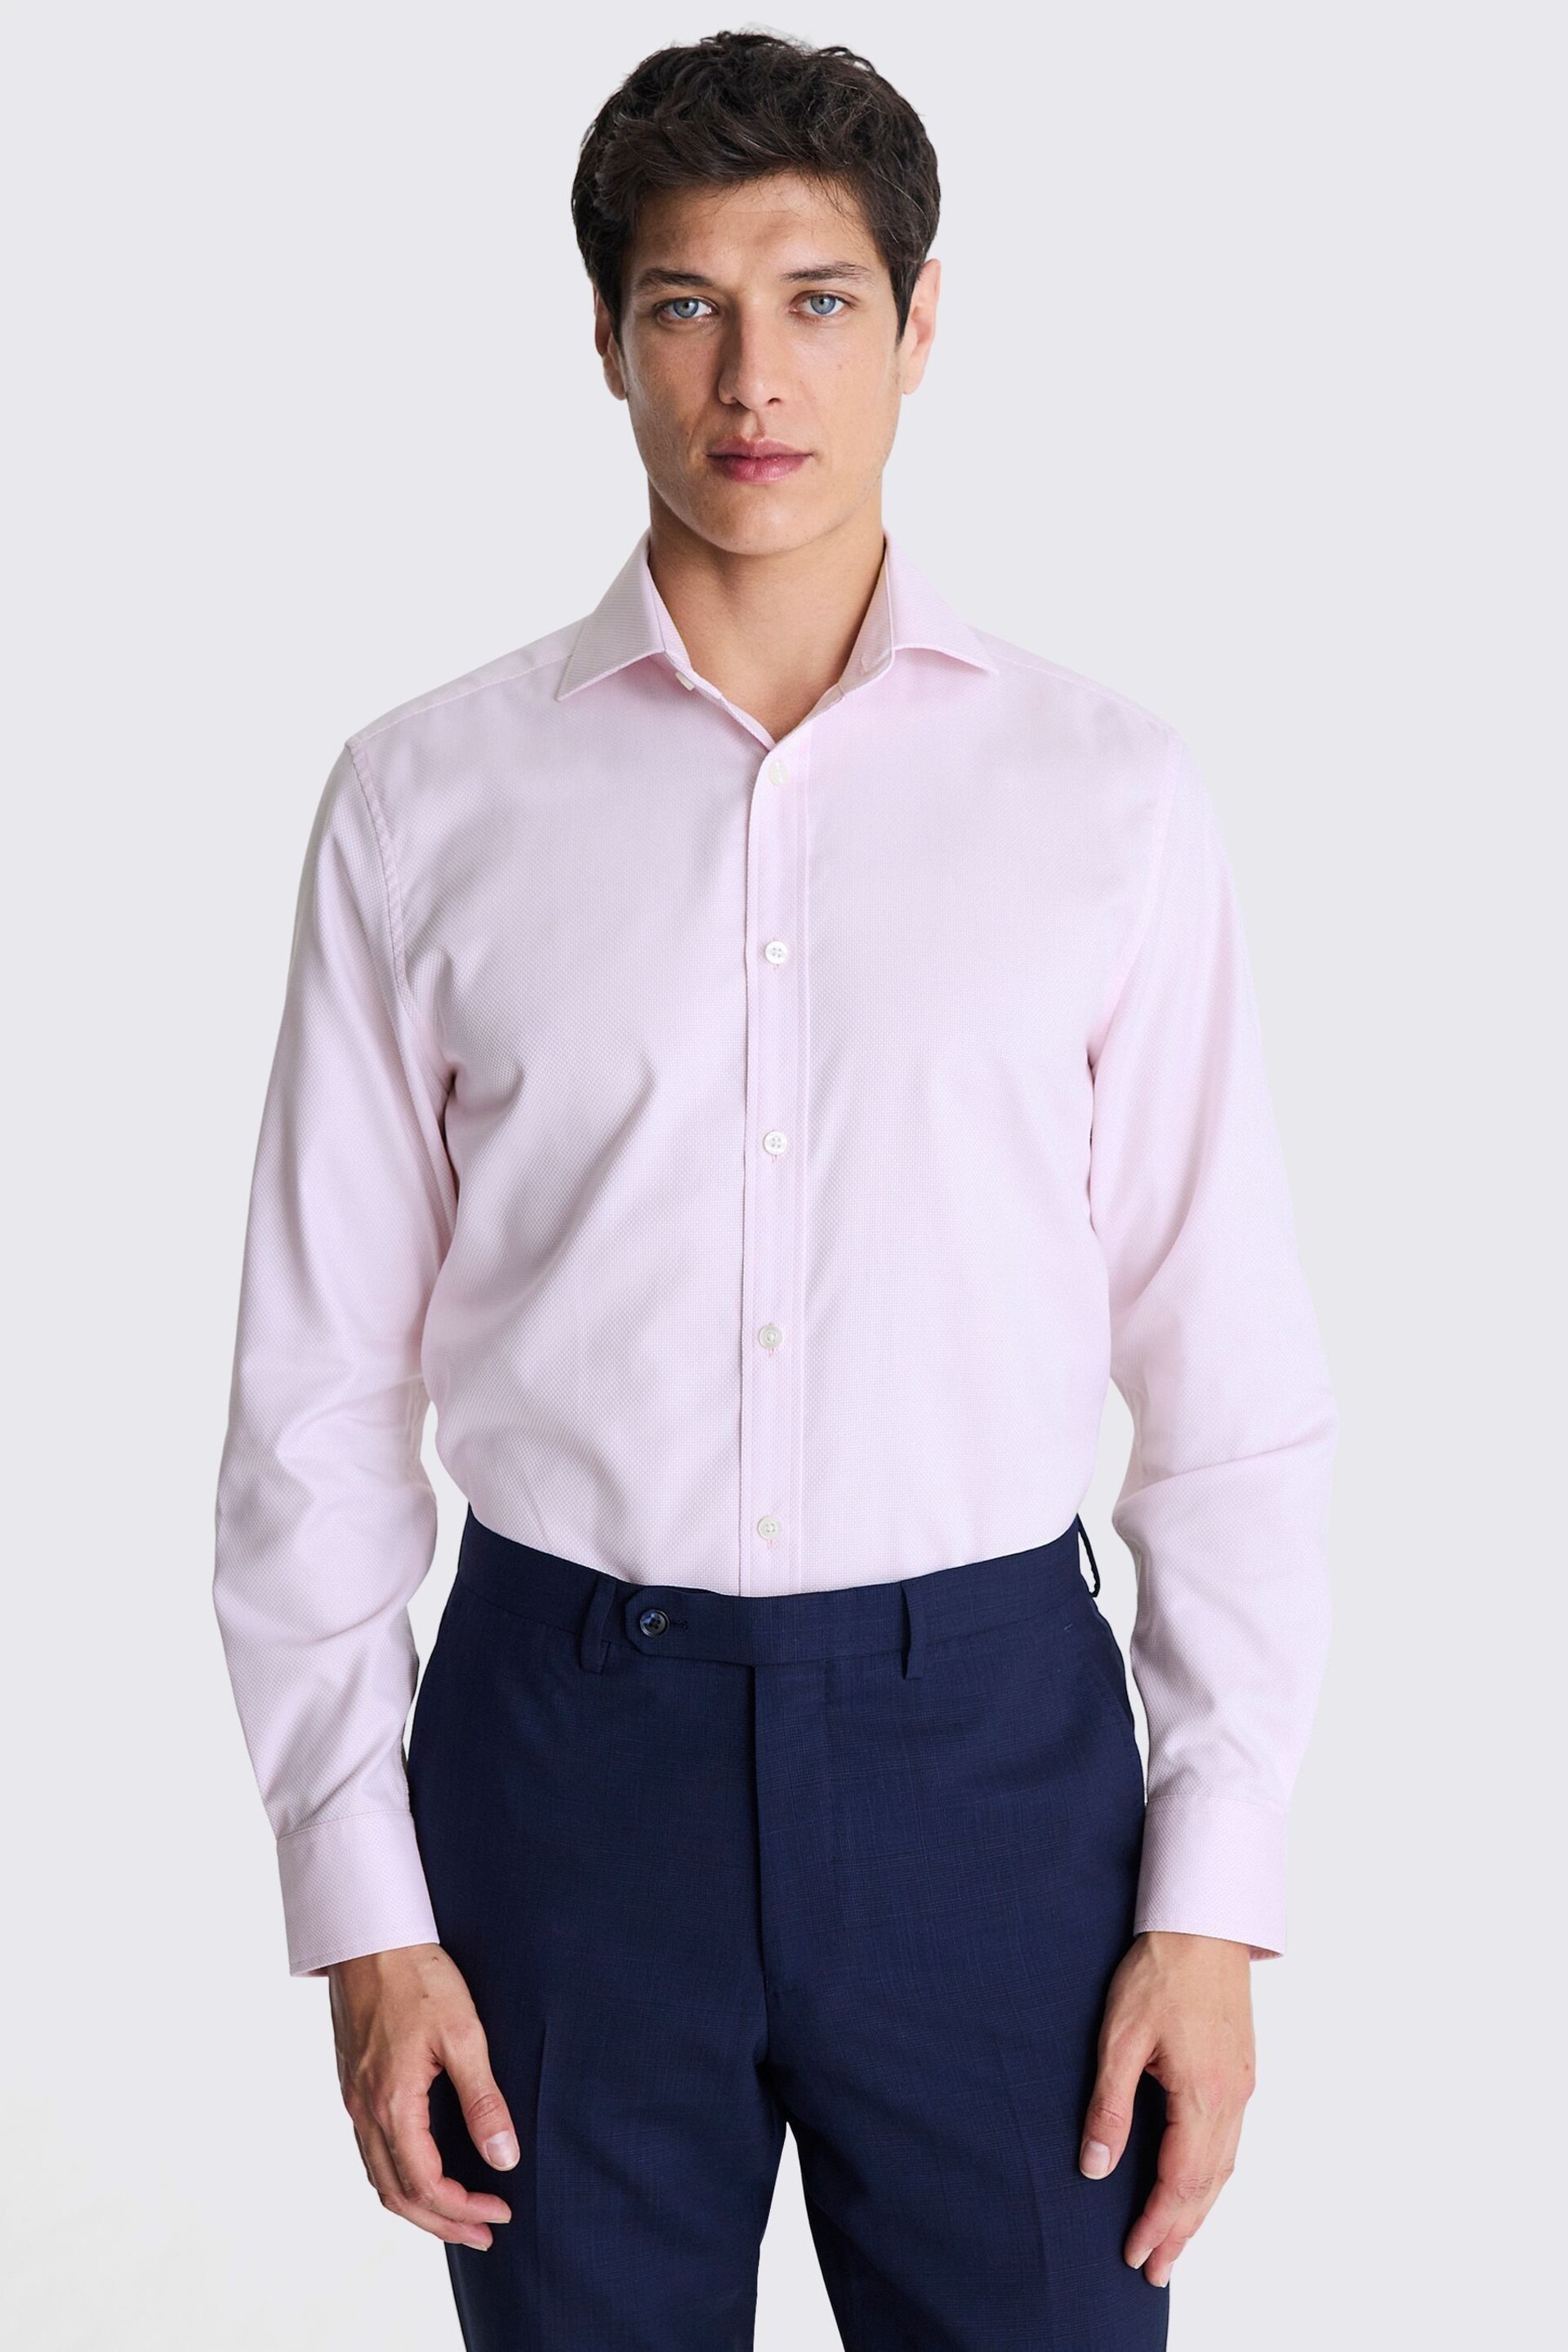 MOSS Light Pink Tailored Dobby Stretch Shirt - Image 1 of 3